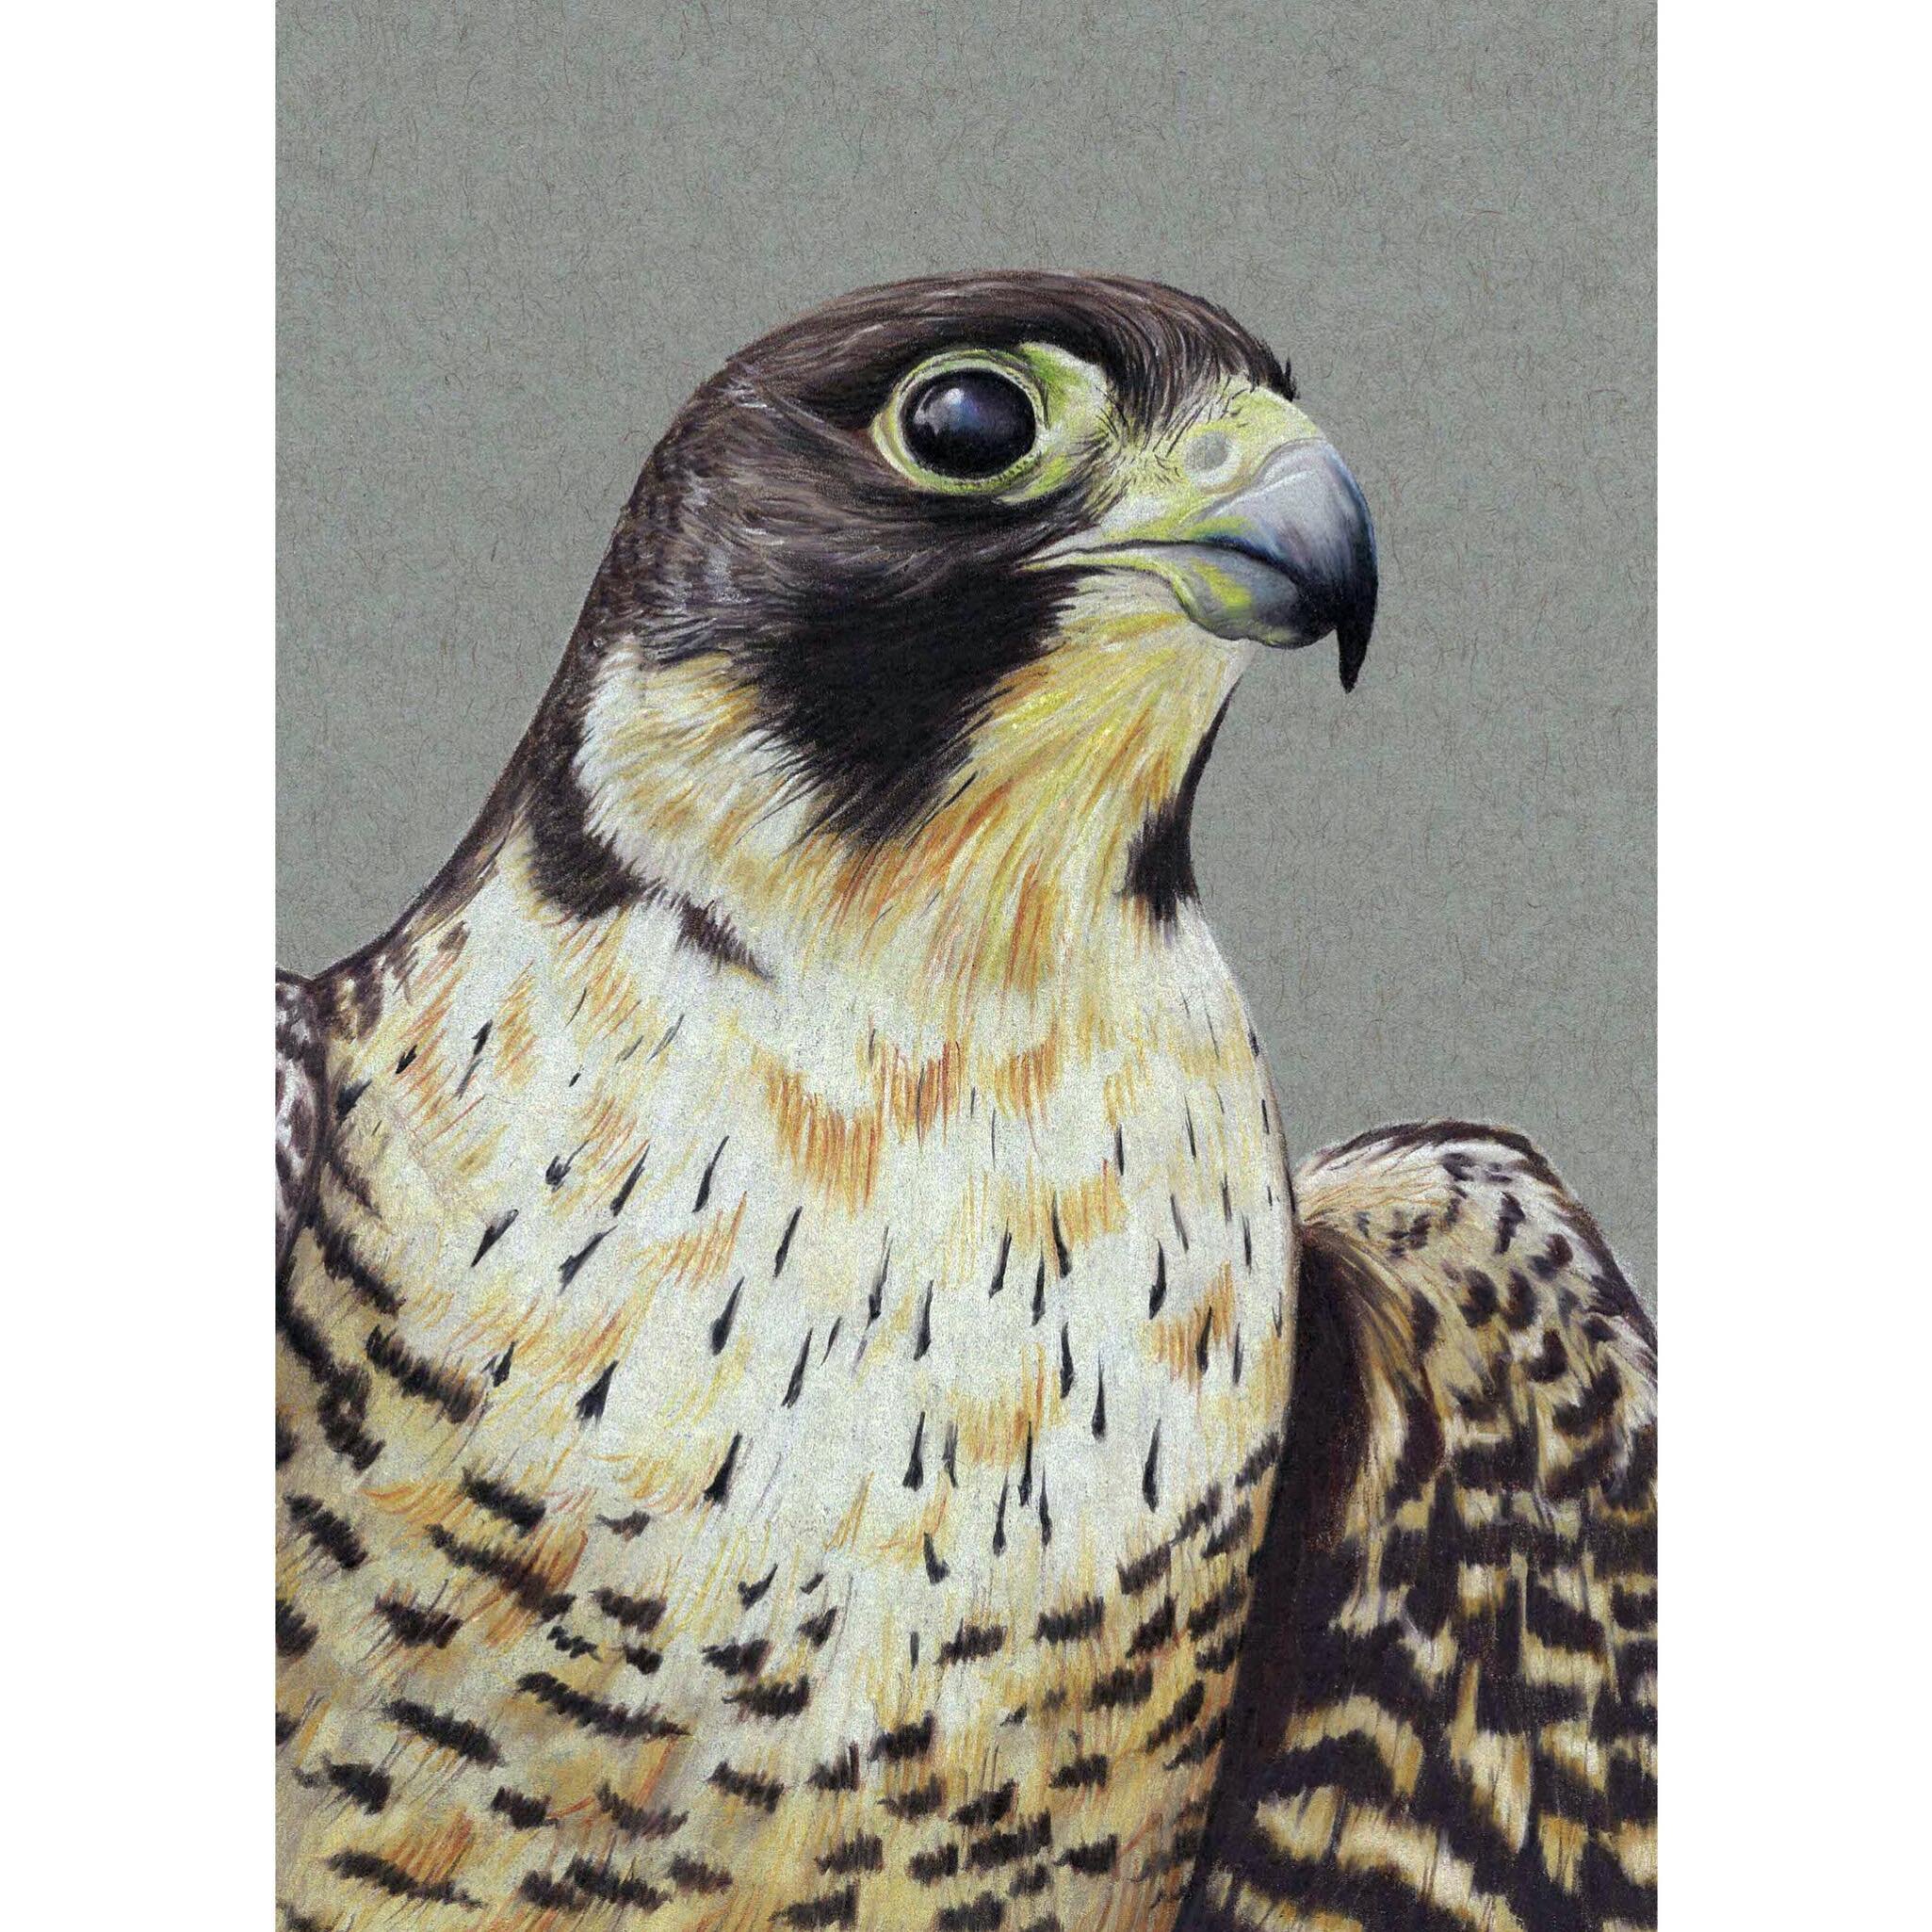 This Peregrine Falcon was a recent commission that I was so excited to do because for some reason I never draw birds of prey??? I love my little songbirds and woodpeckers, but raptors deserve some attention too!
.
.
.
.
.
#peregrinefalcon #falcon #ra